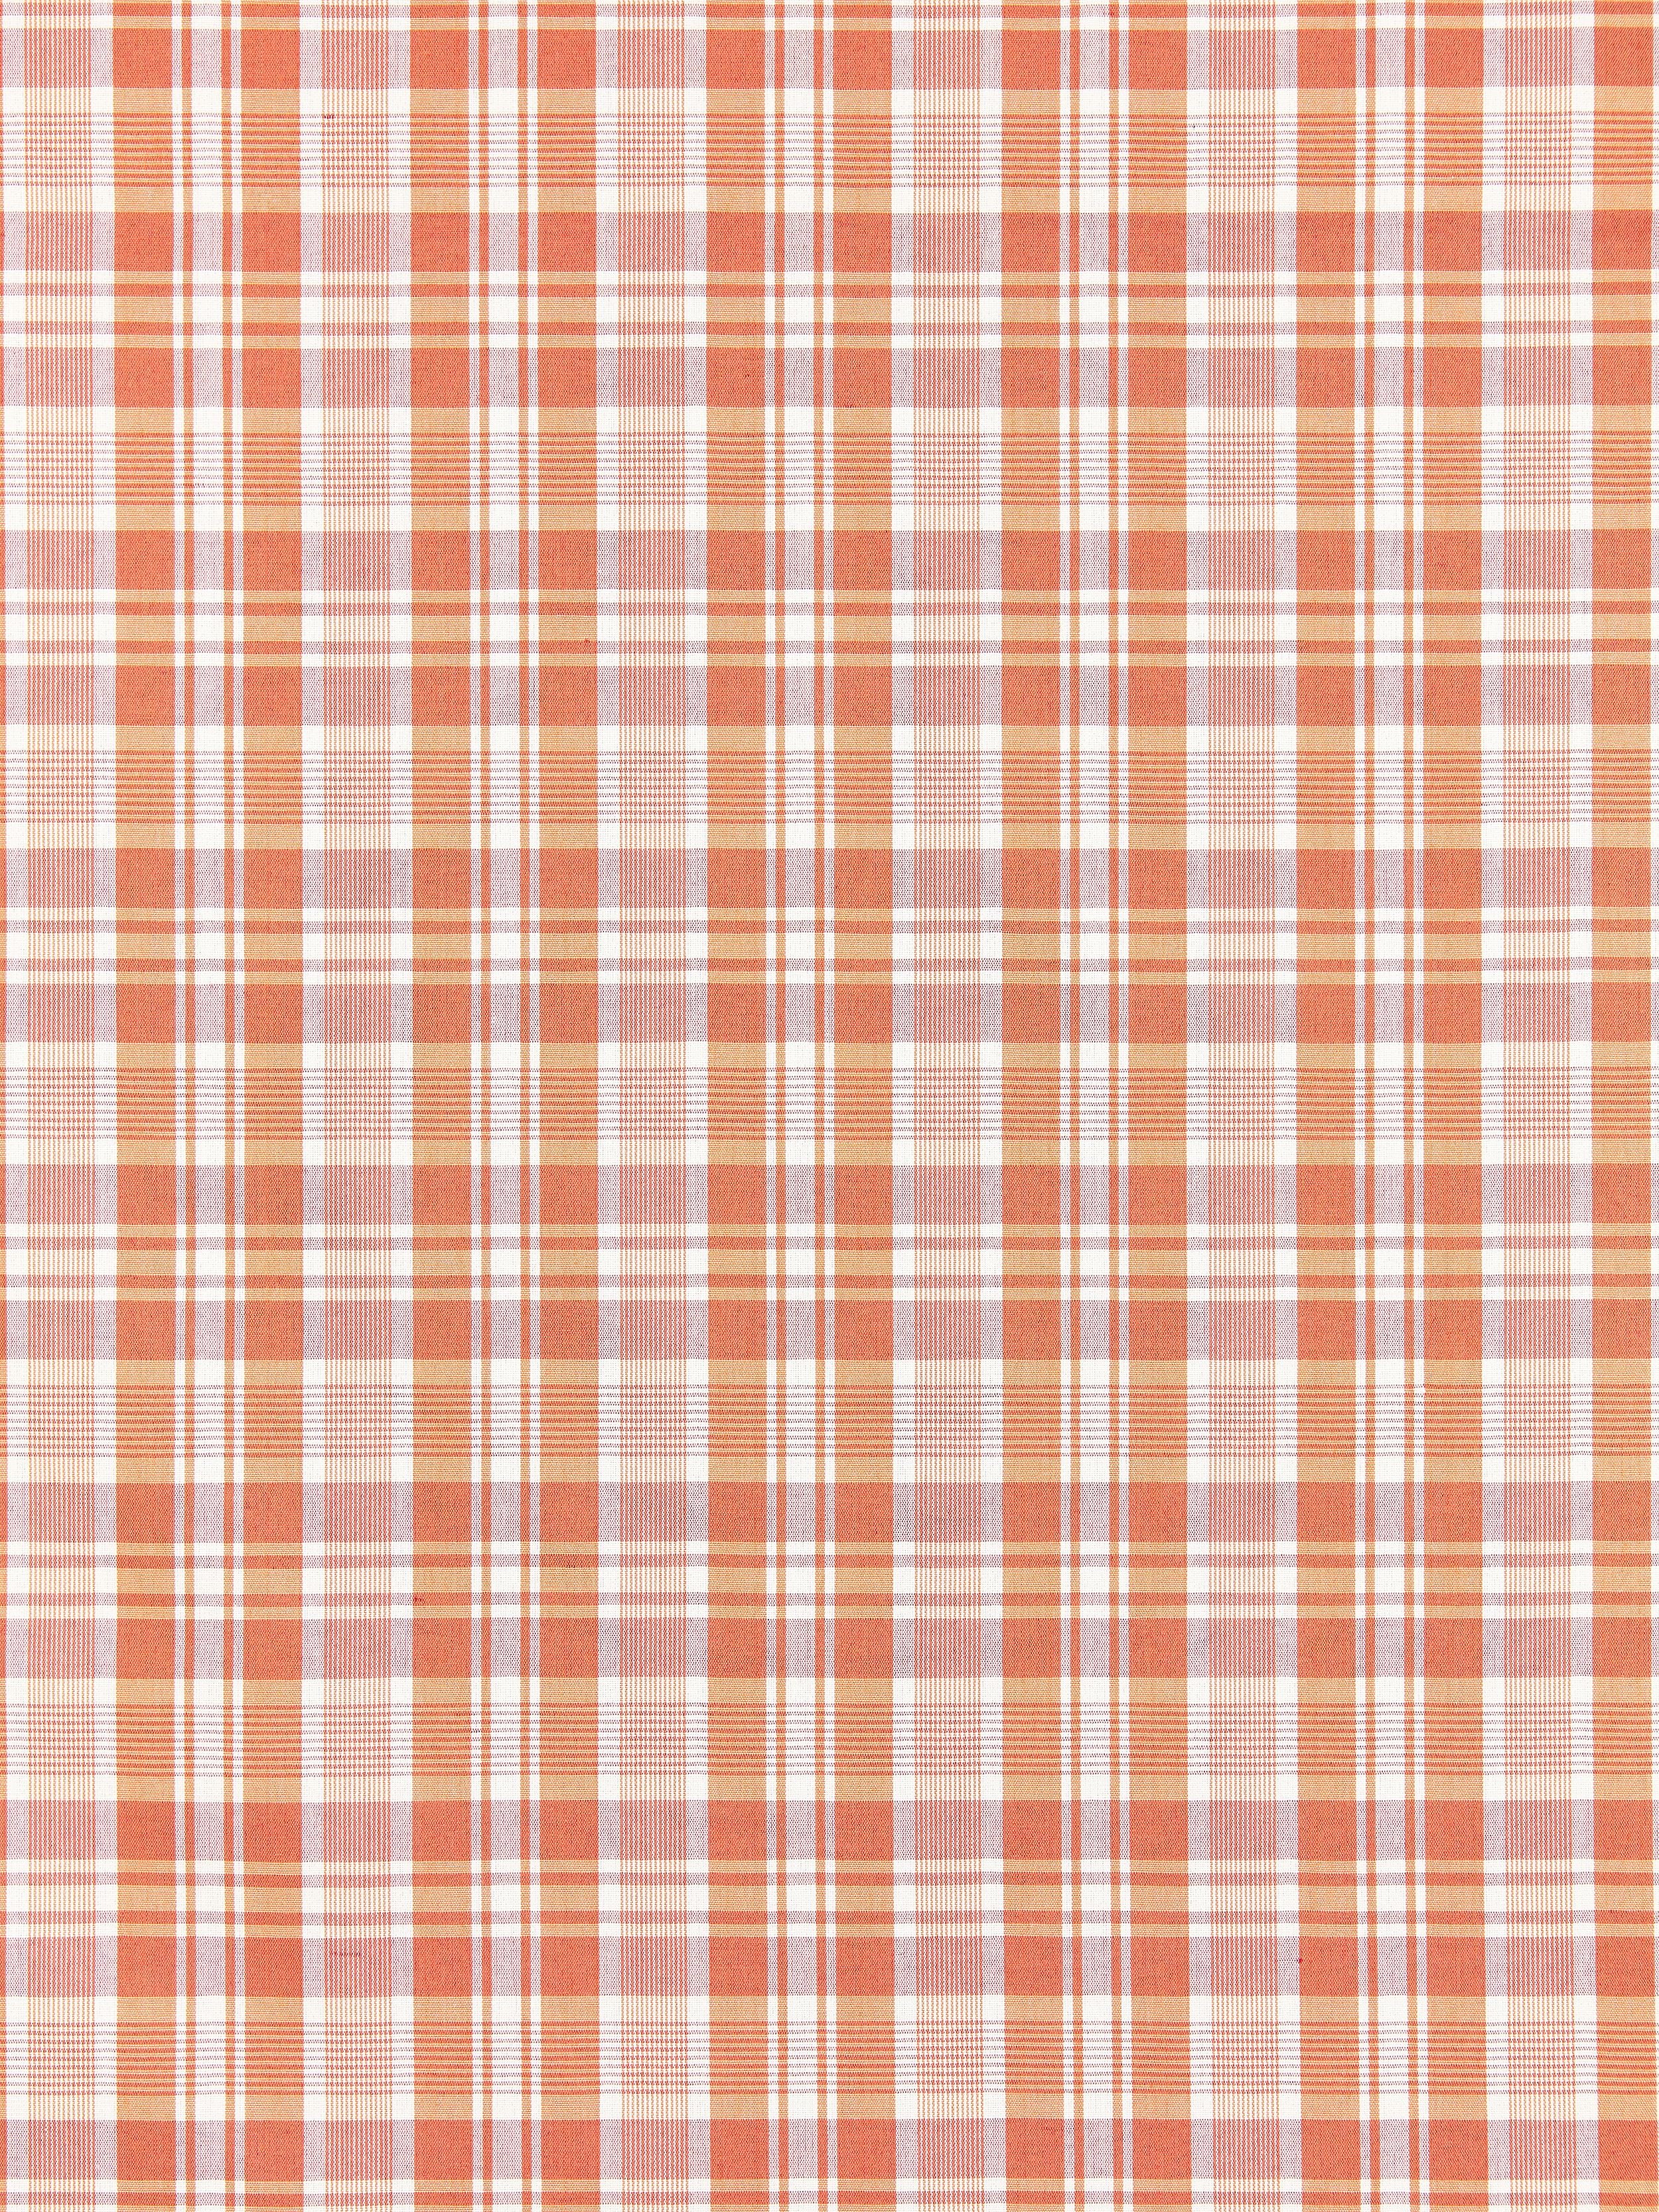 Preston Cotton Plaid fabric in bellini color - pattern number SC 000227122 - by Scalamandre in the Scalamandre Fabrics Book 1 collection